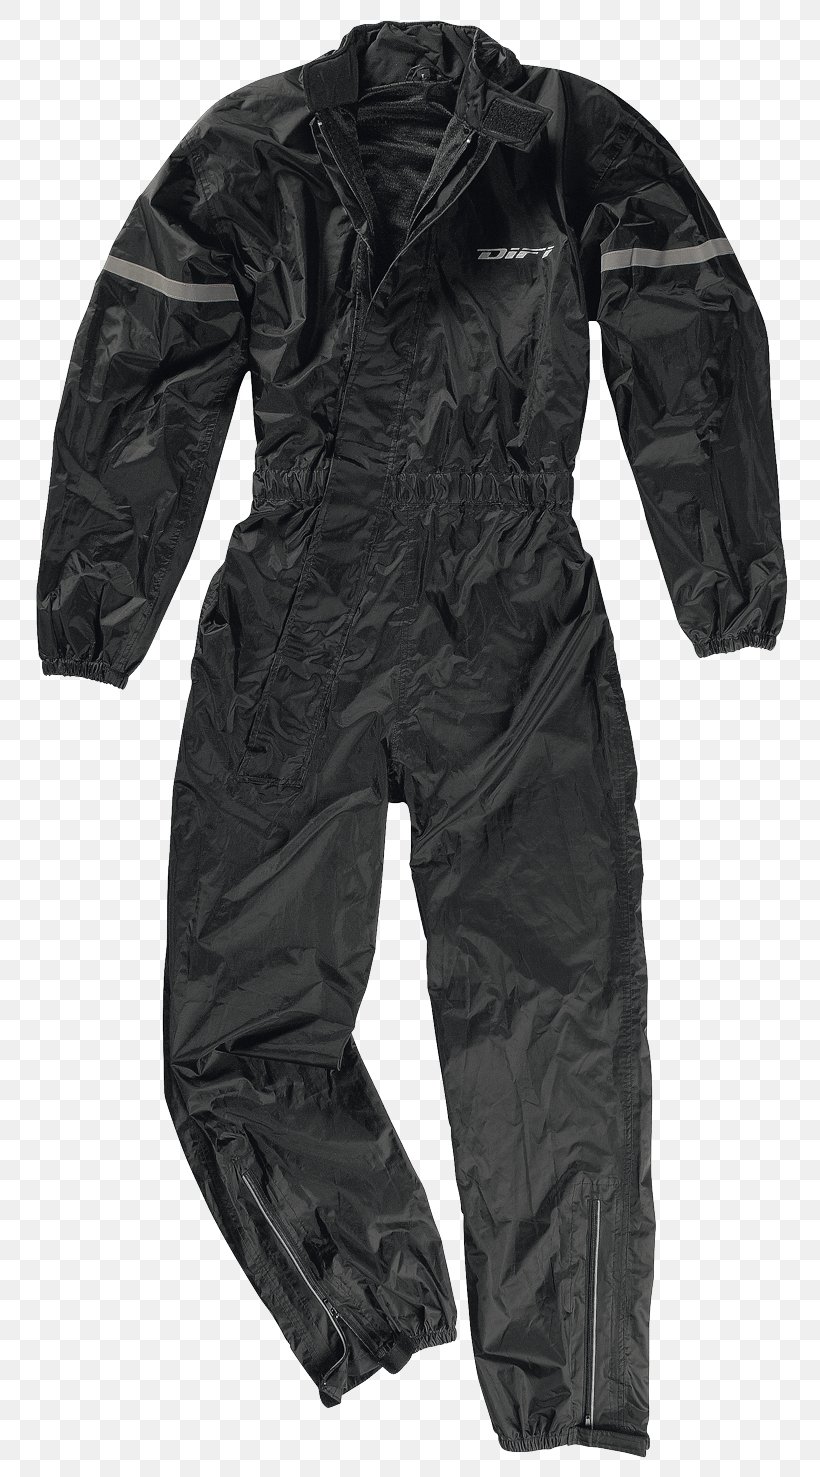 Motorcycle Personal Protective Equipment Regenbekleidung Clothing Accessories, PNG, 806x1477px, Motorcycle, Boilersuit, Boot, Clothing, Clothing Accessories Download Free